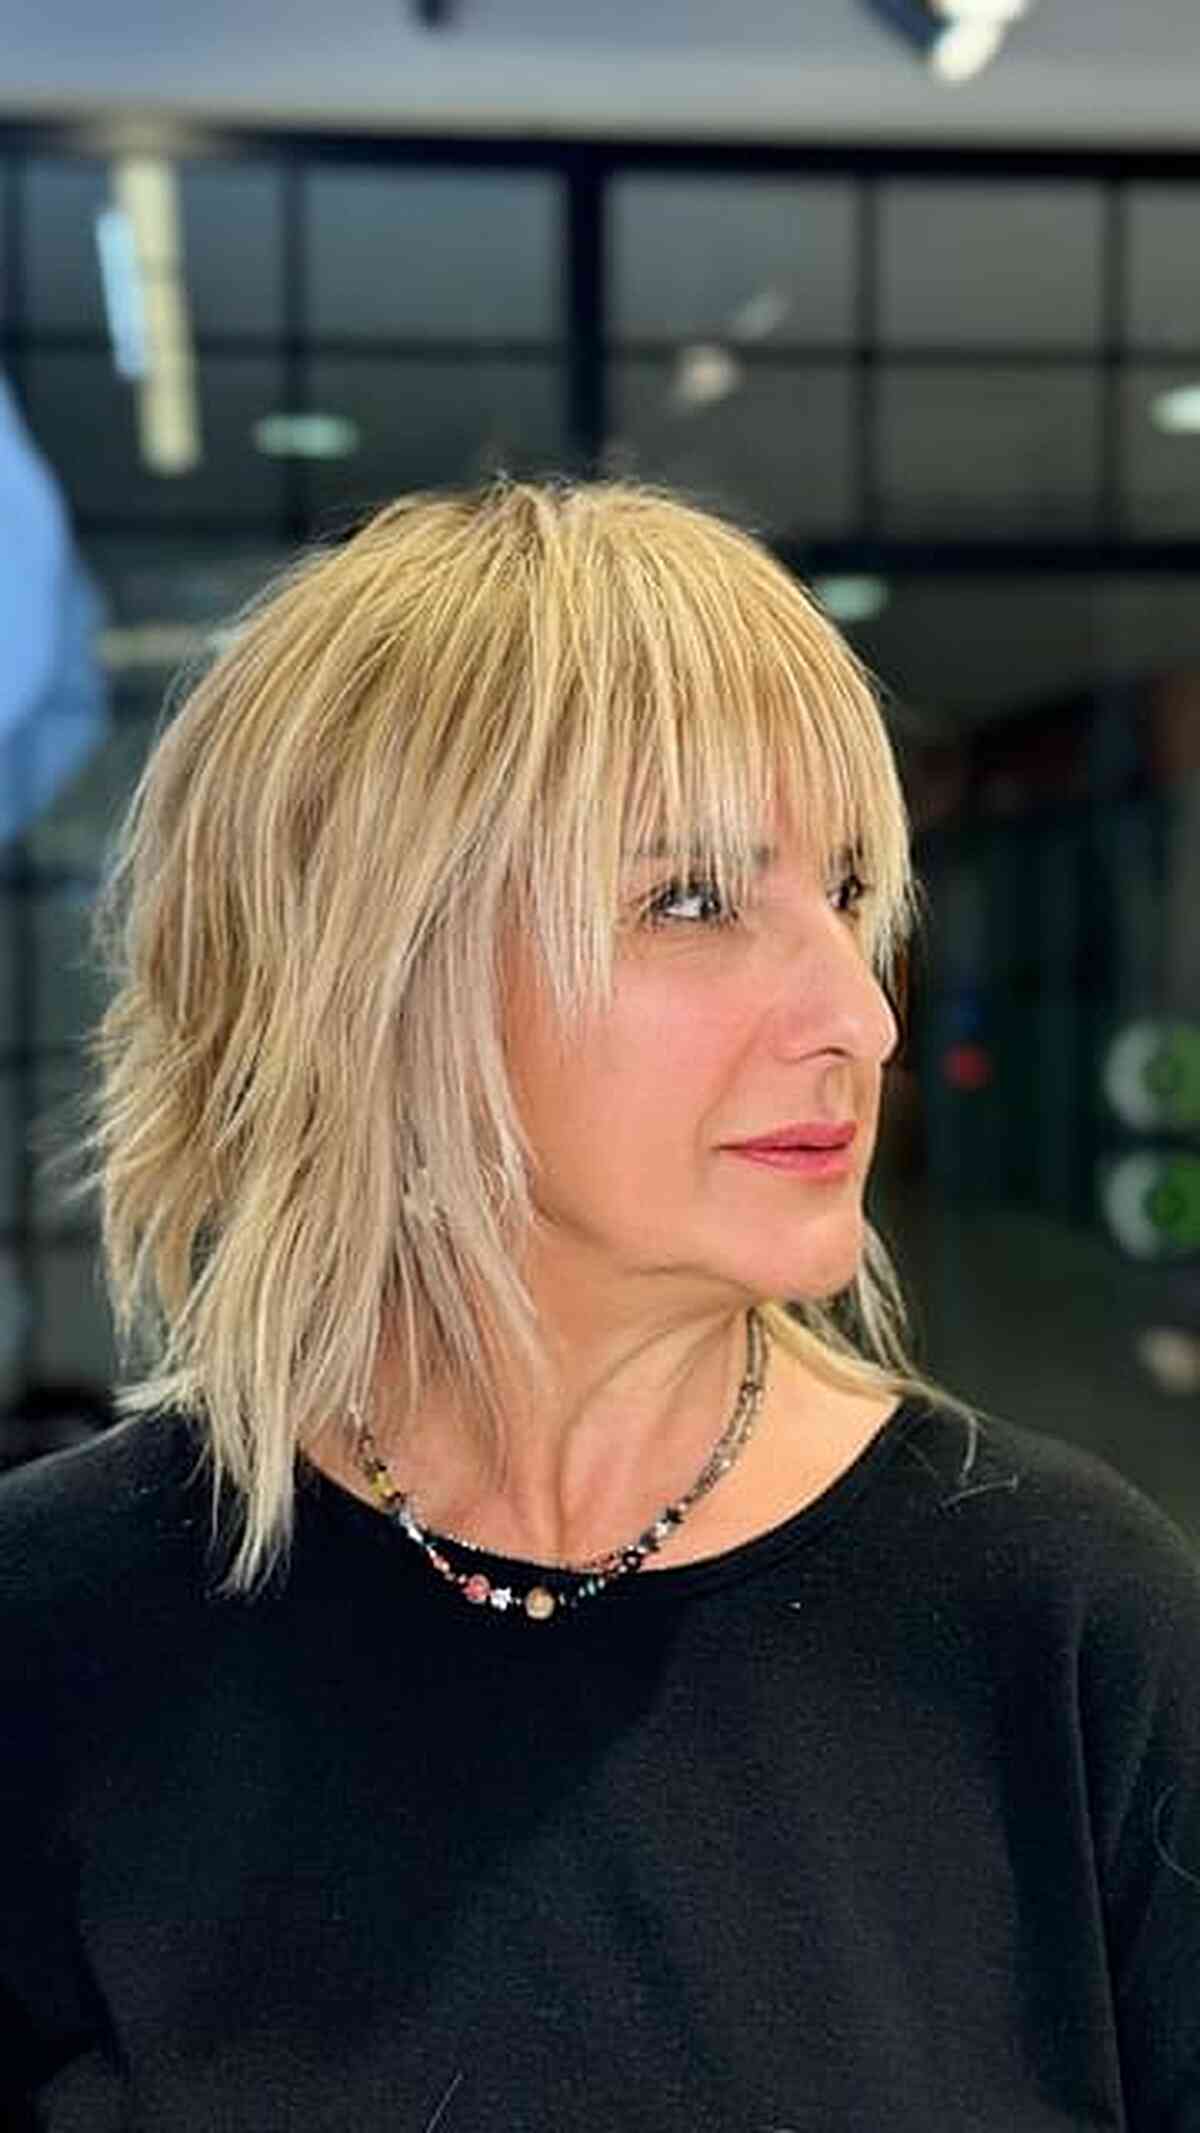 Stylish bob haircuts for women over 60: 20+ spectacular ideas